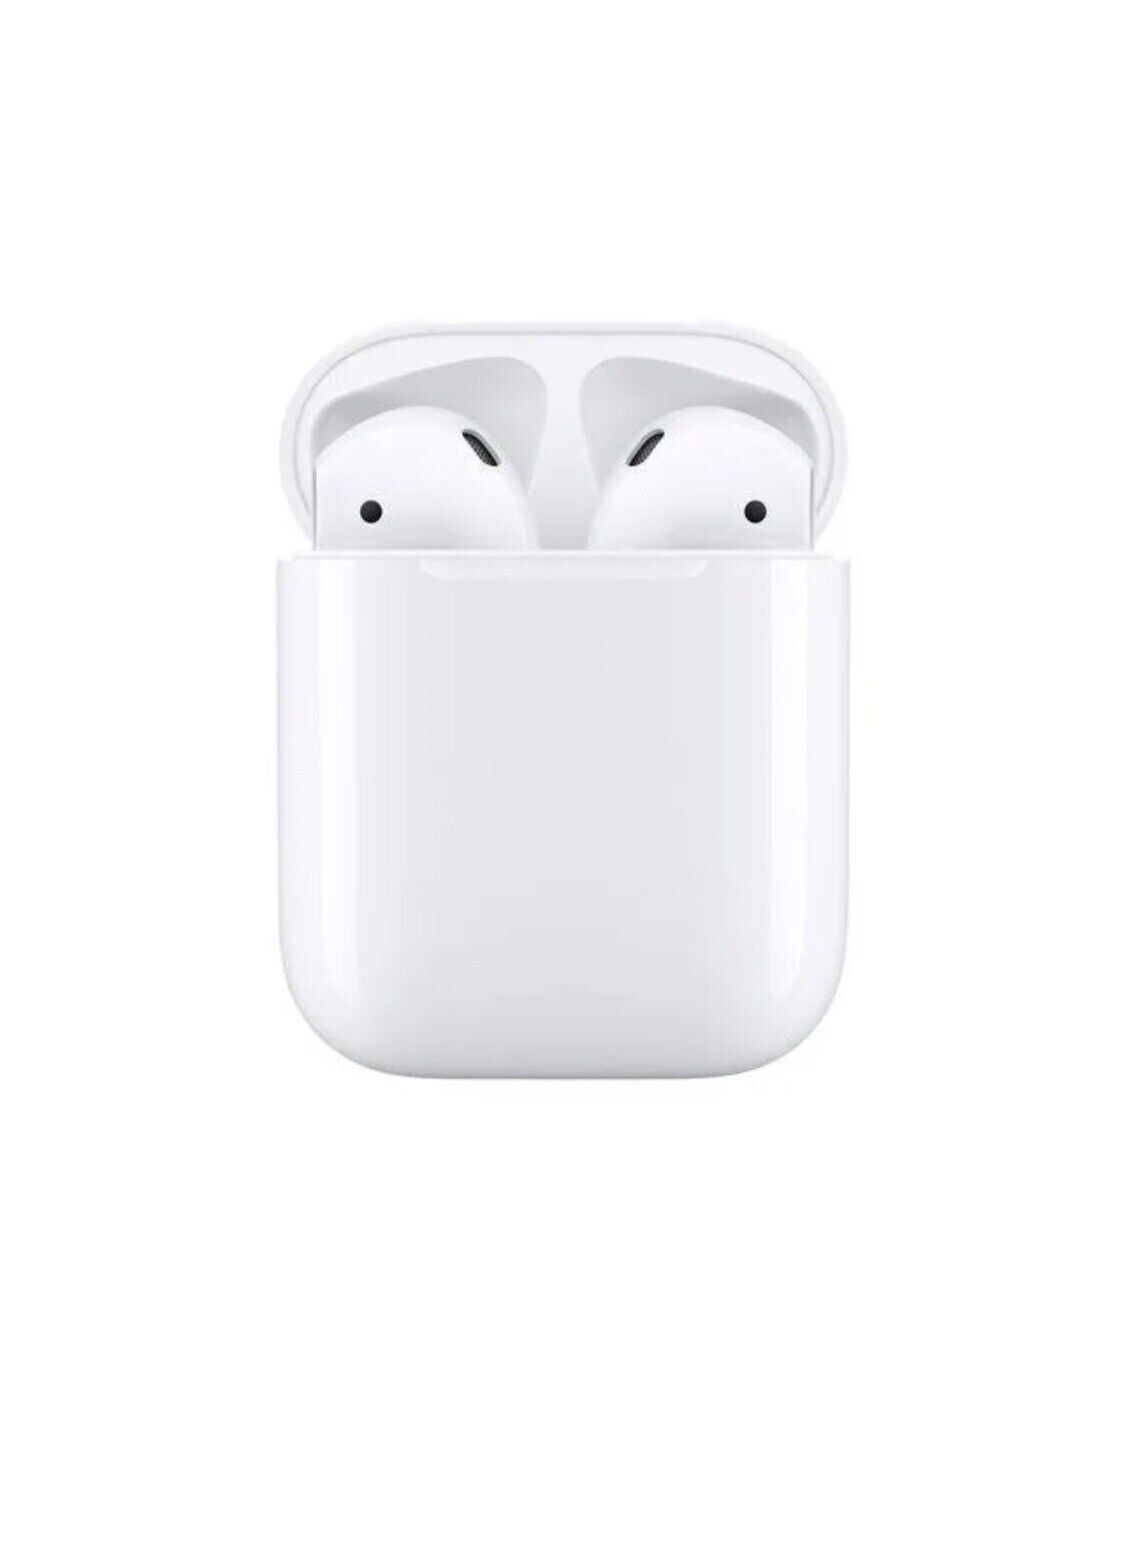 	Apple Airpods With Charging Case 2nd Generation - True Wireless Earphones With 